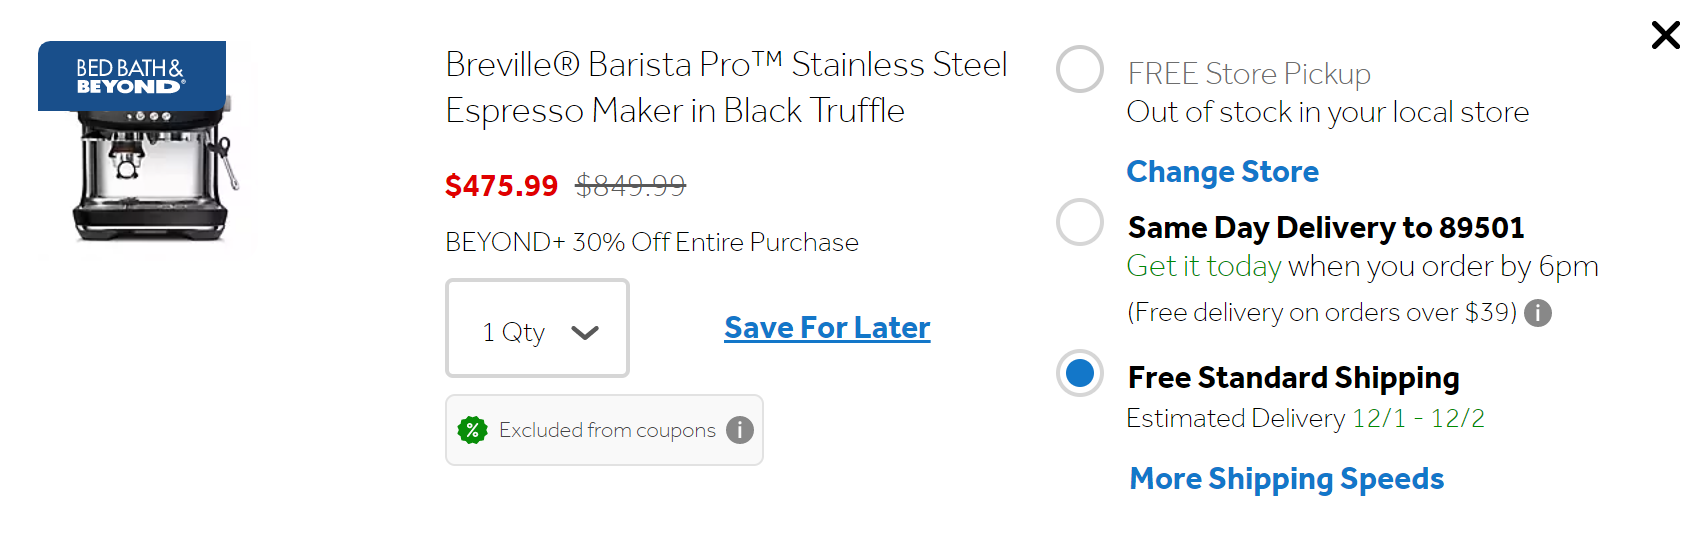 Breville Barista Pro $475.99 (Beyond Plus Member Required) YMMV